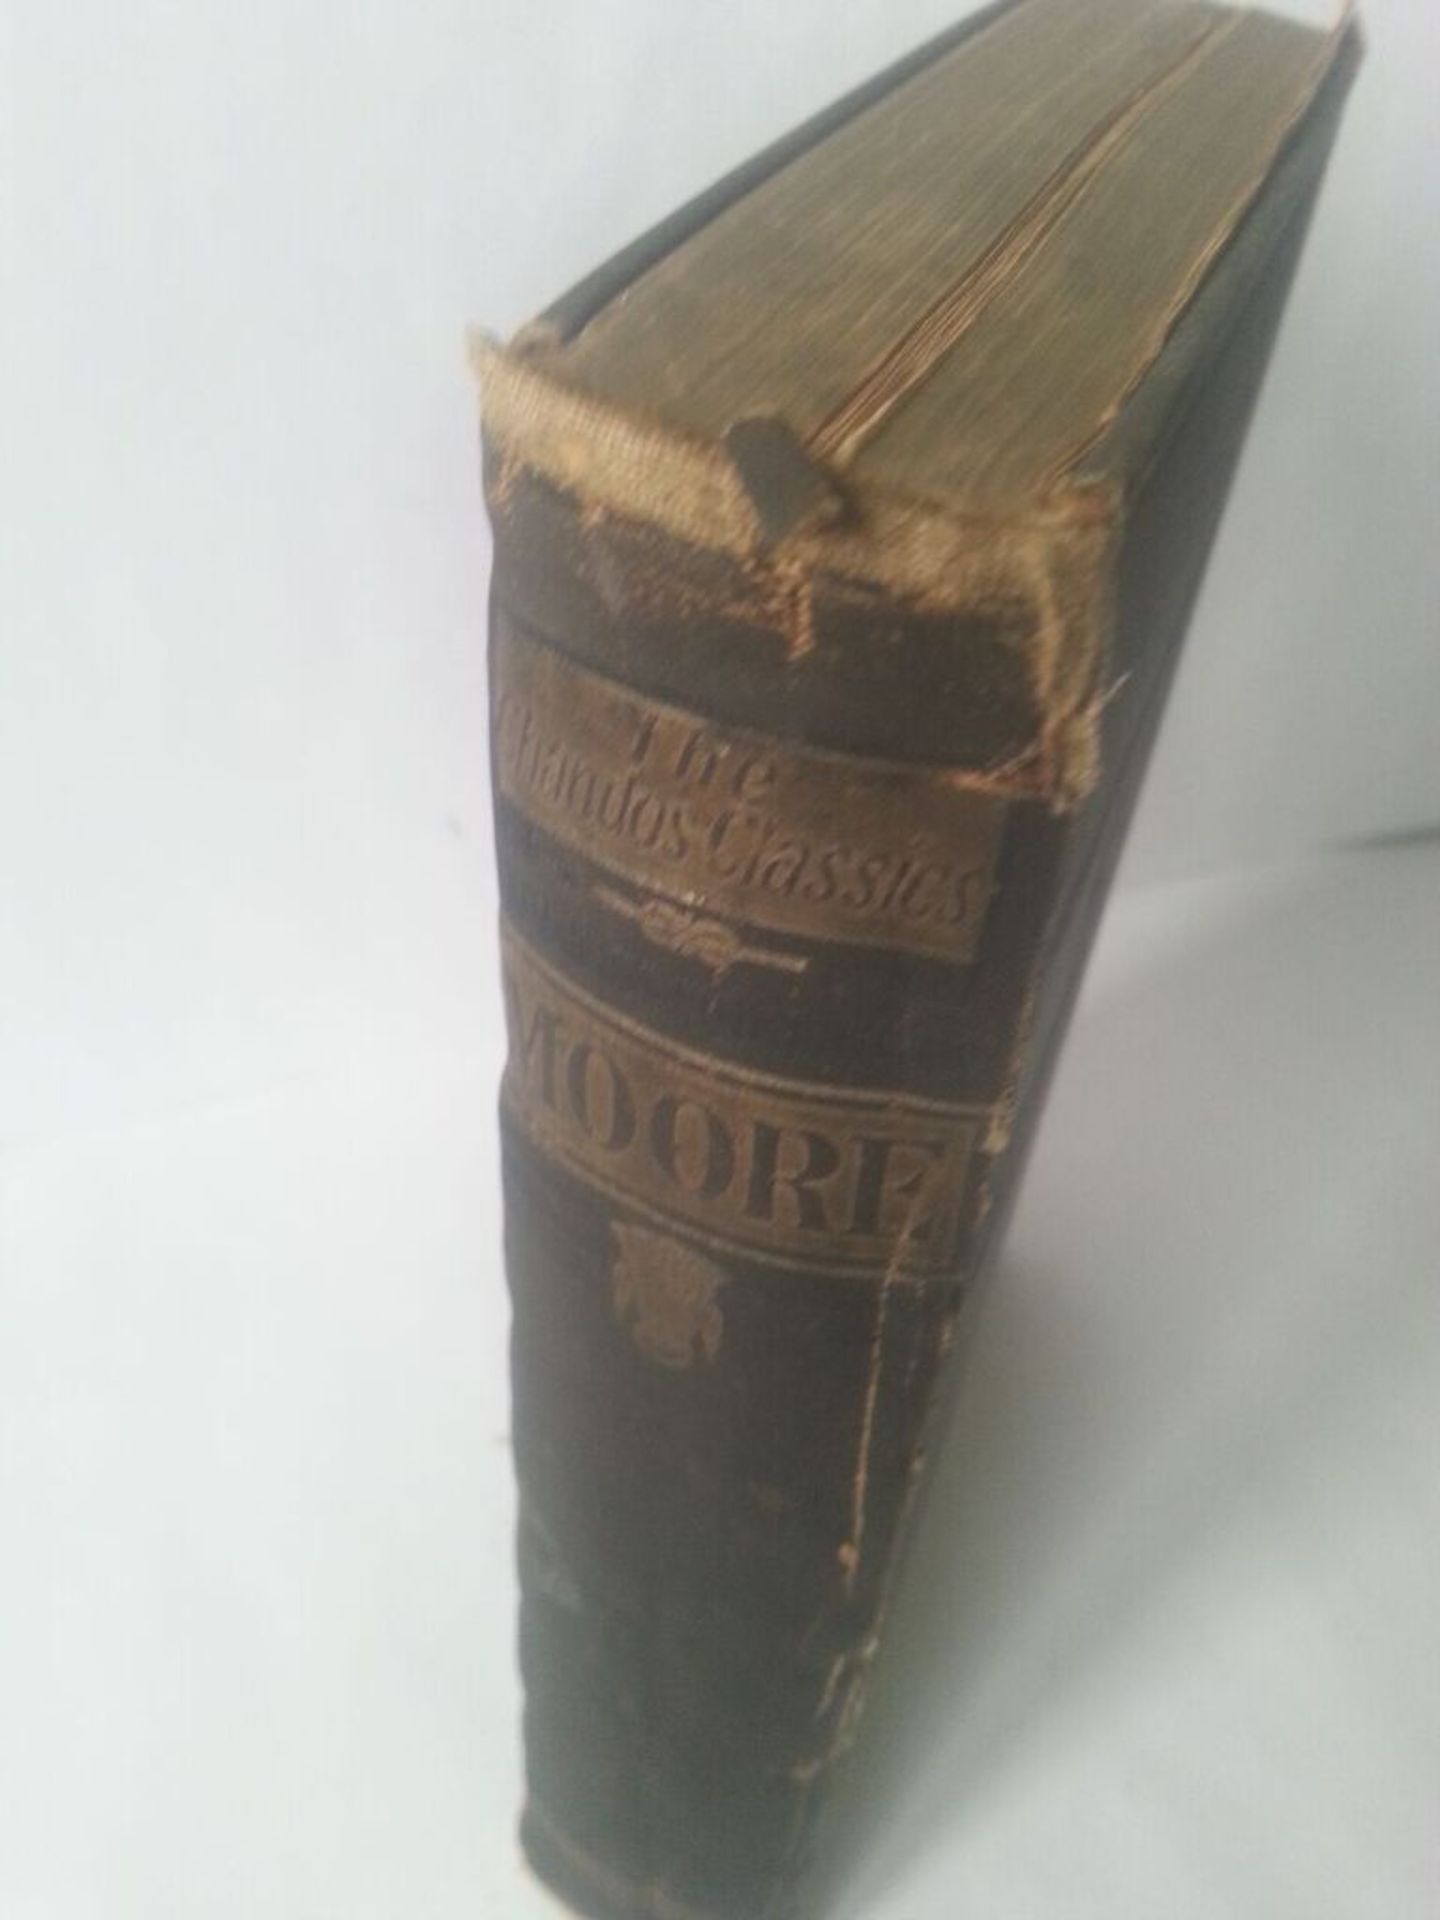 Antique book "The Poetical Works of Thomas Moore" The Chandos Classics London; Frederick Warne & Co - Image 3 of 3